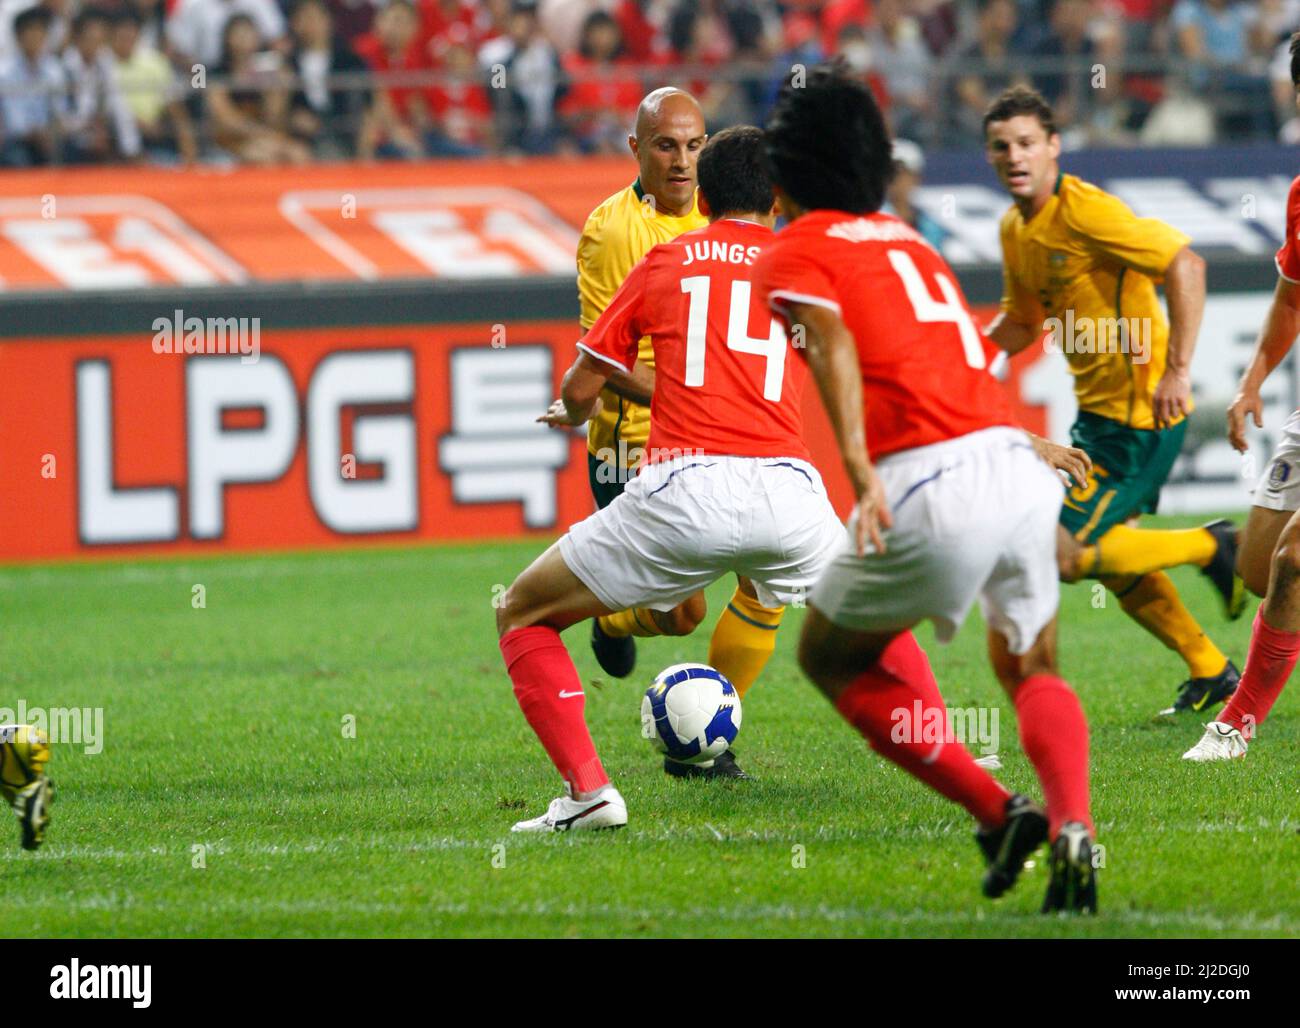 Sep 5, 2009-Seoul, South Korea-Mark Bresciano of Australia and Lee Jung-Soo of South Korea compete for the ball during the international friendly match between South Korea and the Australian Socceroos at Seoul World Cup Stadium on September 5, 2009 in Seoul, South Korea. Stock Photo